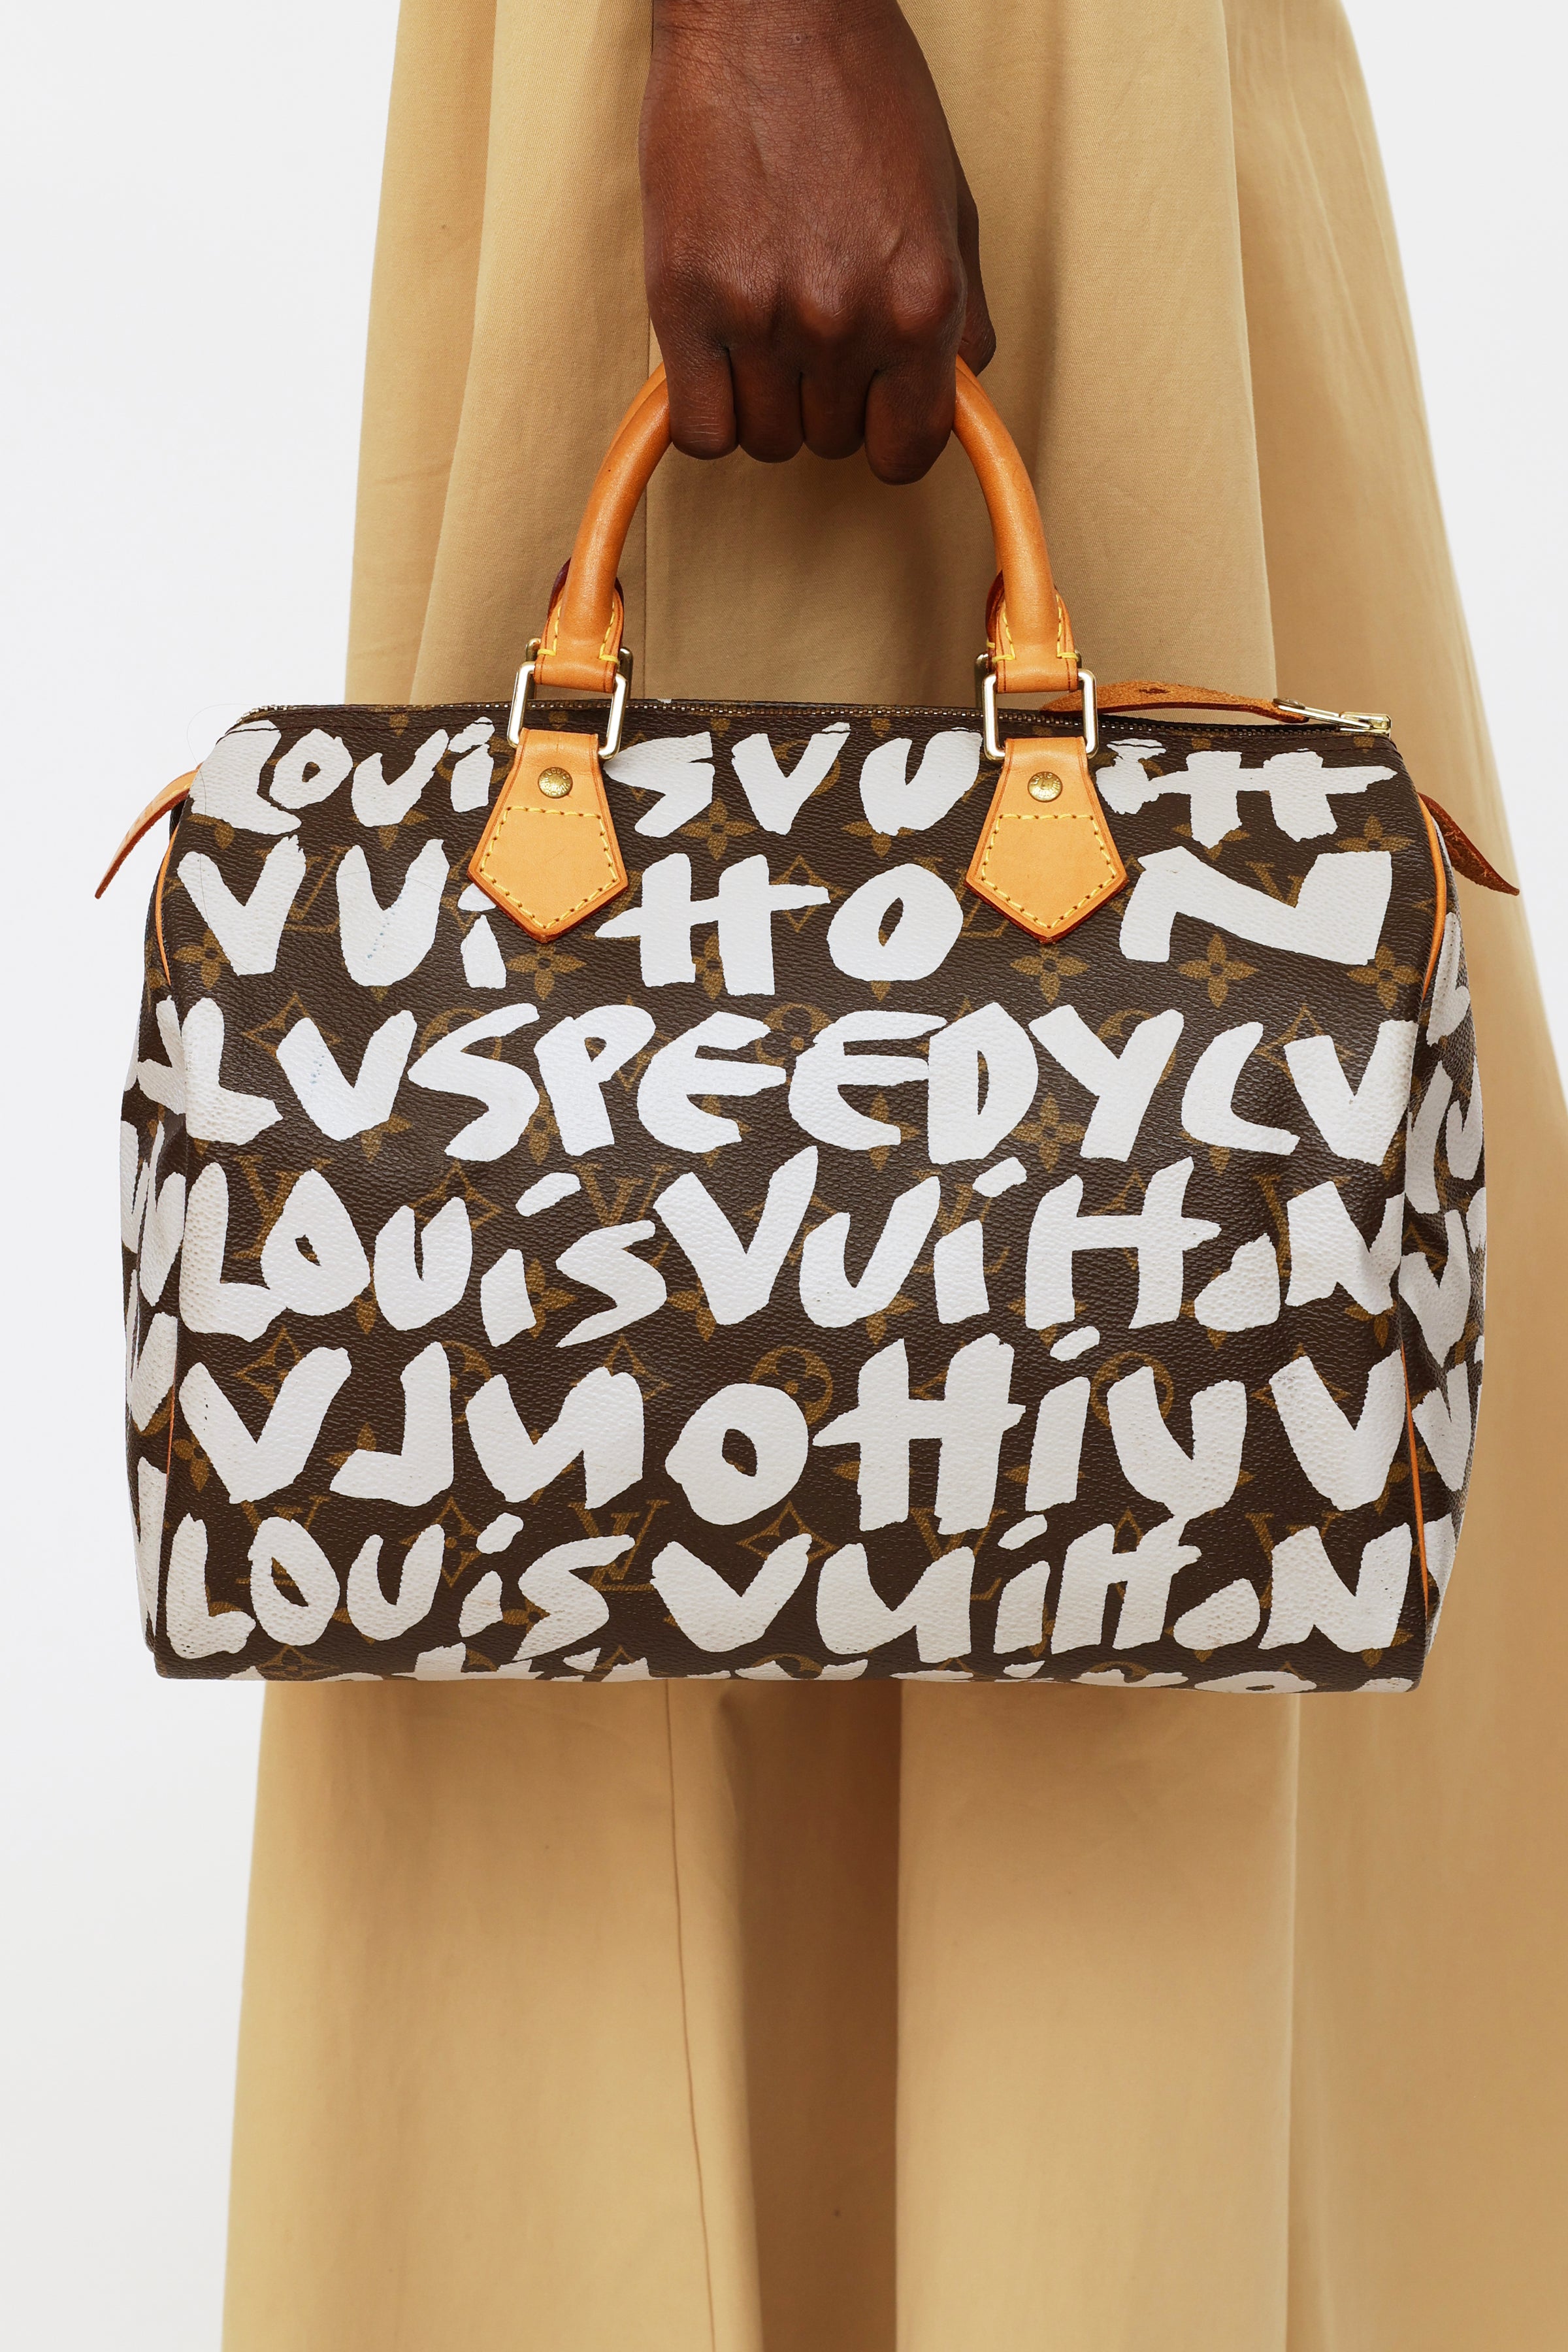 Louis Vuitton Stephen Sprouse 2001 Pre-owned Speedy 30 Bag